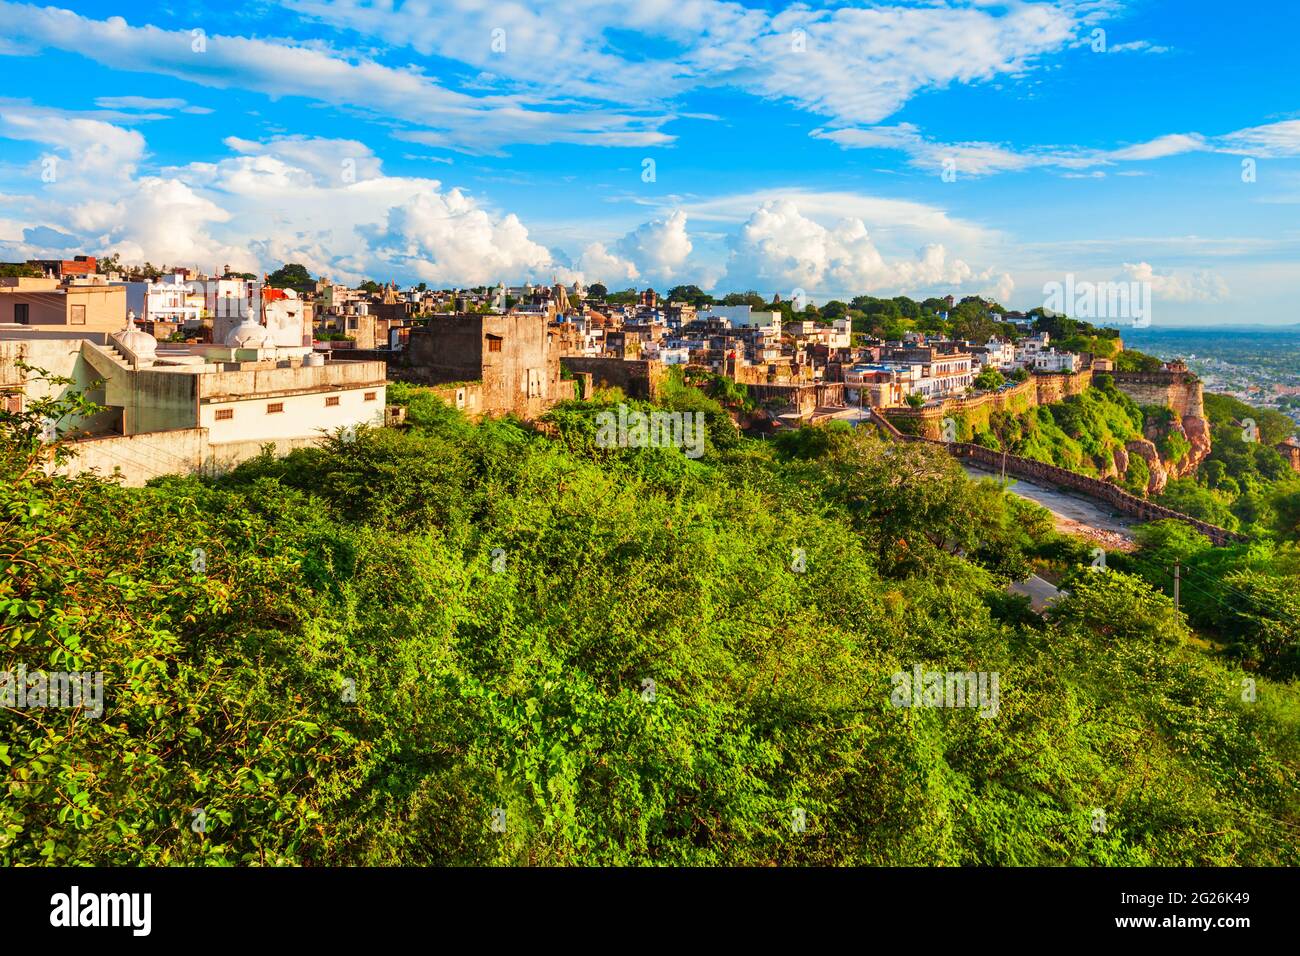 Chittor Fort in Chittorgarh city, Rajasthan state of India Stock Photo